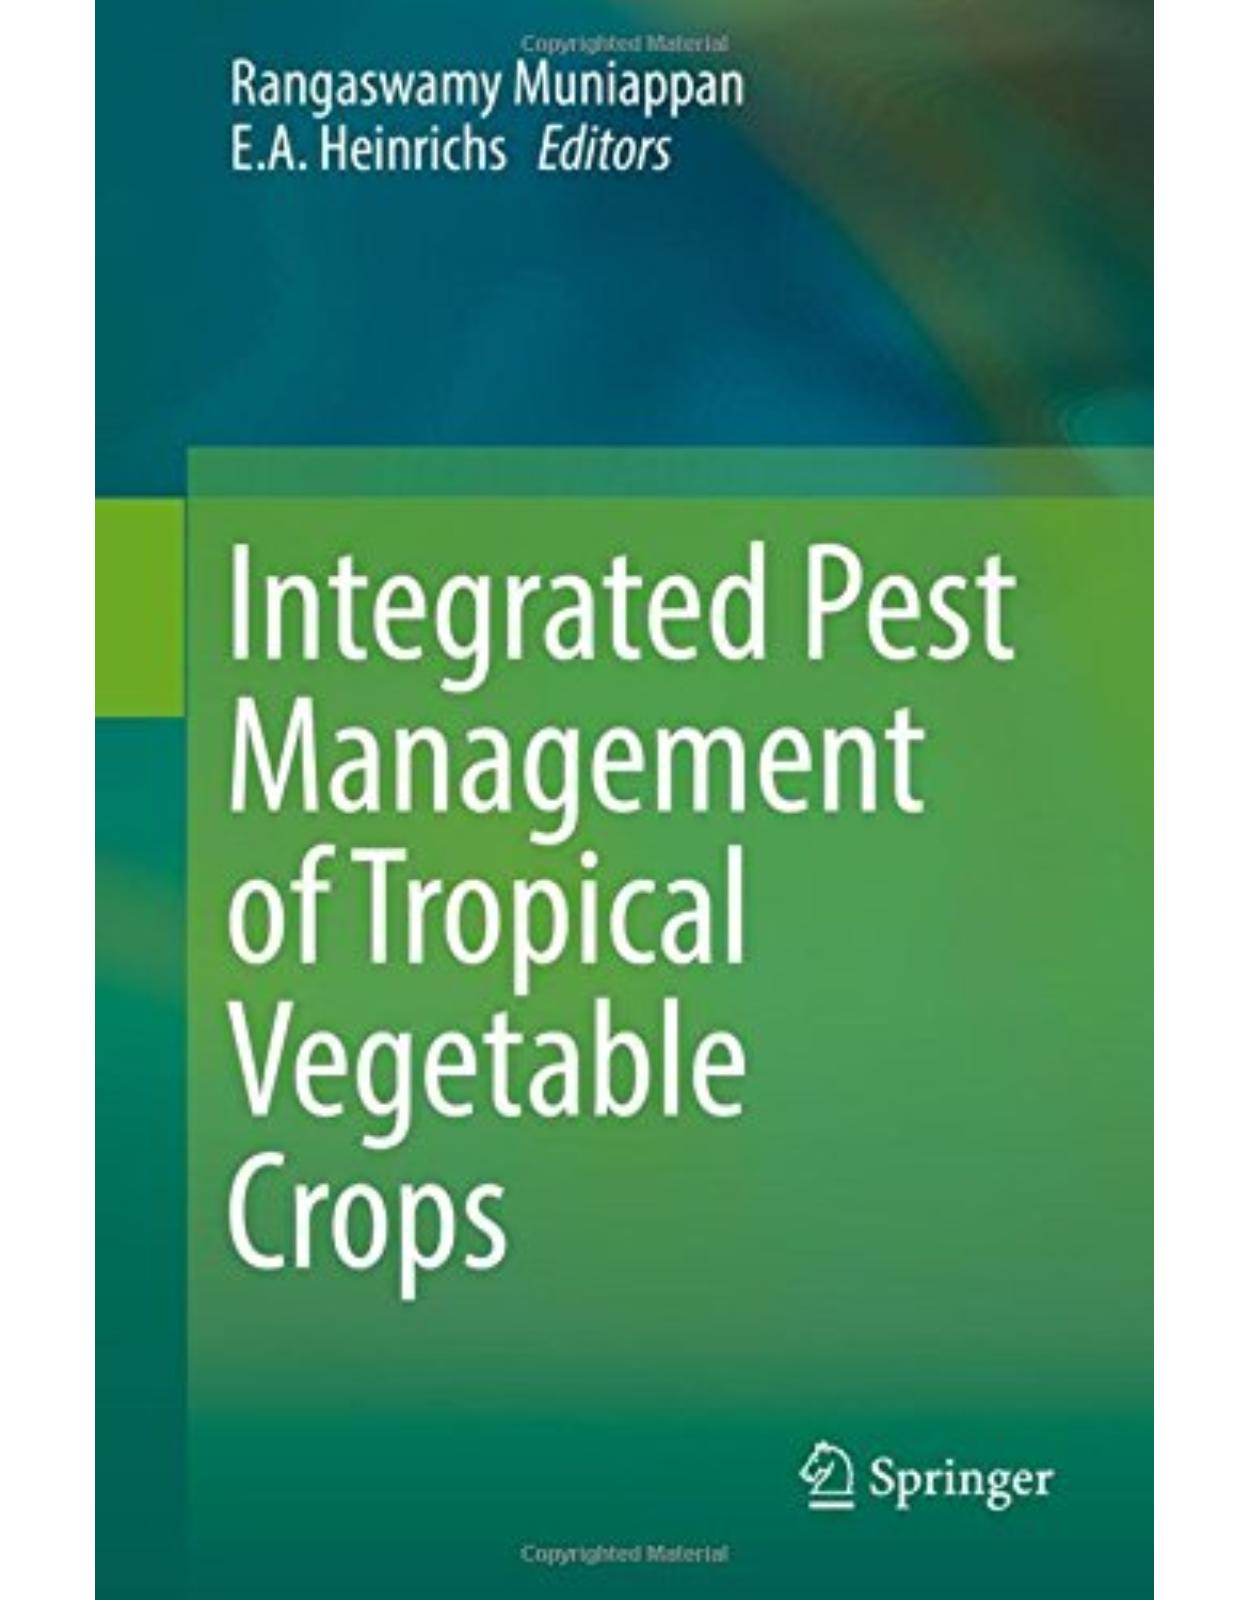 Integrated Pest Management of Tropical Vegetable Crops